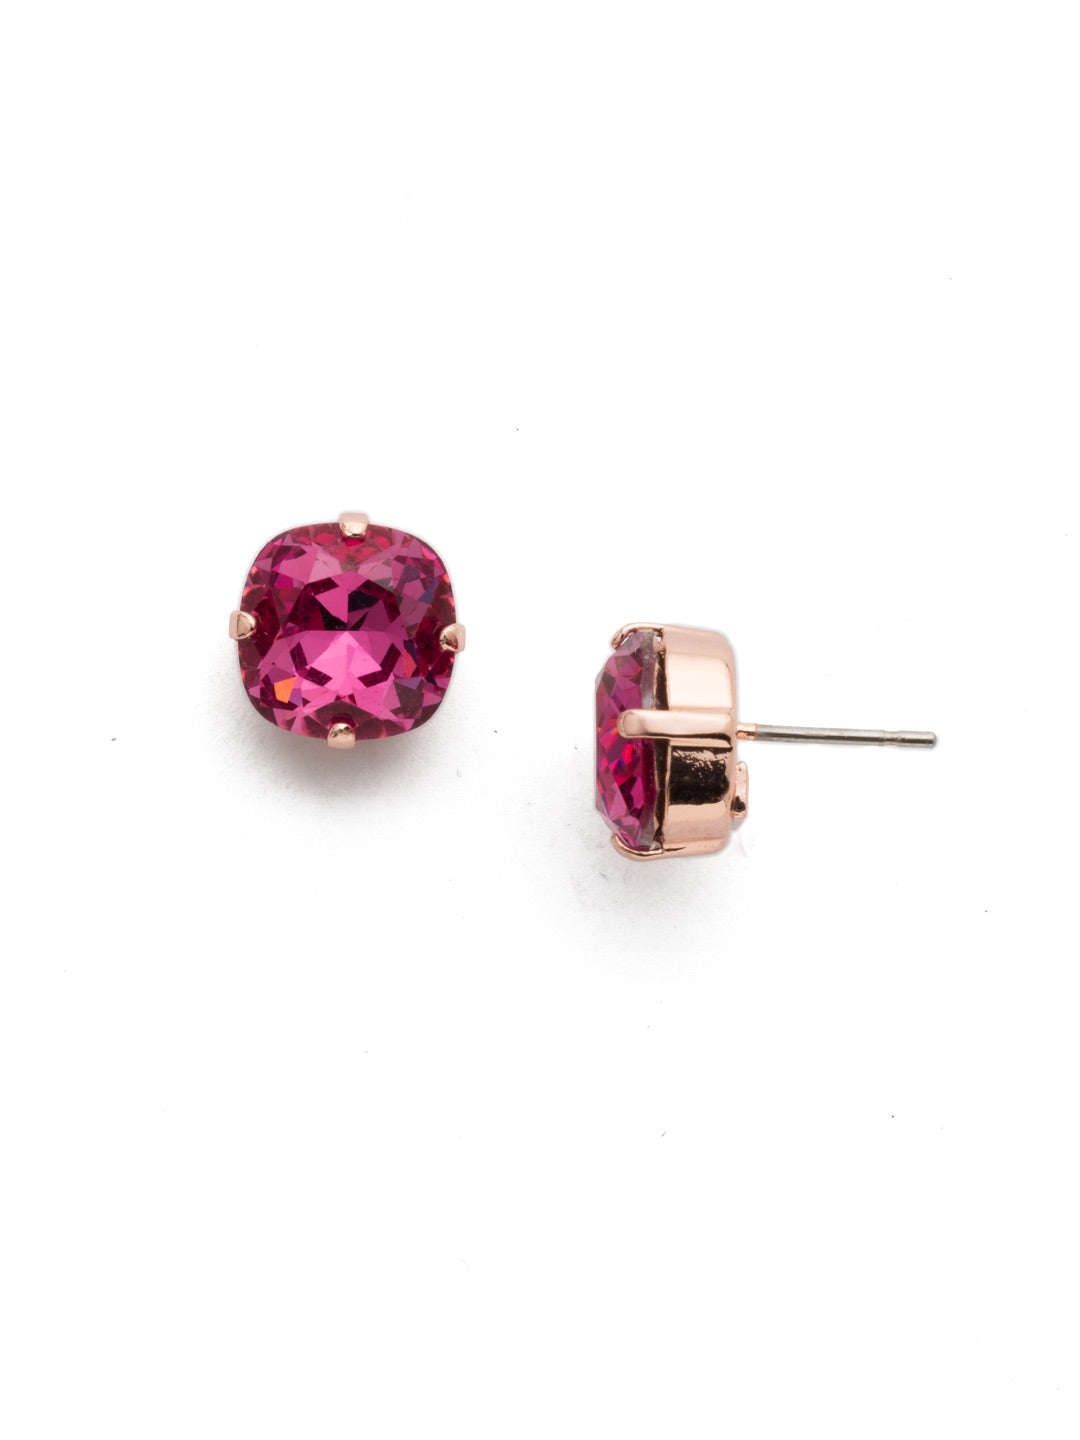 Halcyon Stud Earrings - EDH25RGFCA - <p>A beautiful, luminous cushion-cut crystal in a classic four-pronged setting that's ideal for everyday wear. From Sorrelli's Fuschia collection in our Rose Gold-tone finish.</p>